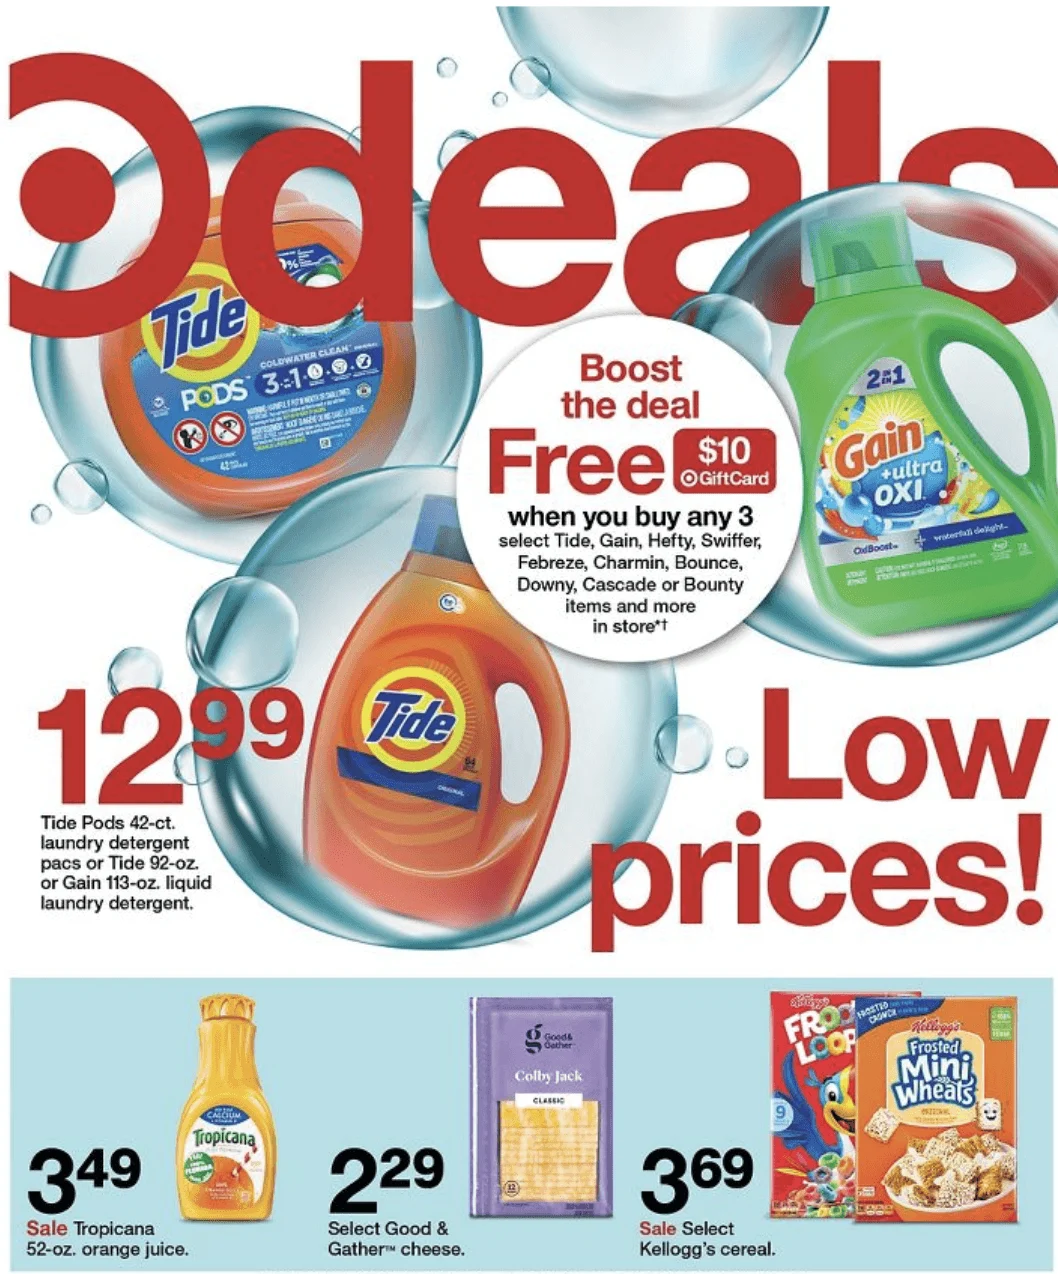 Target Ad for This Week 5_28_23 pg 1